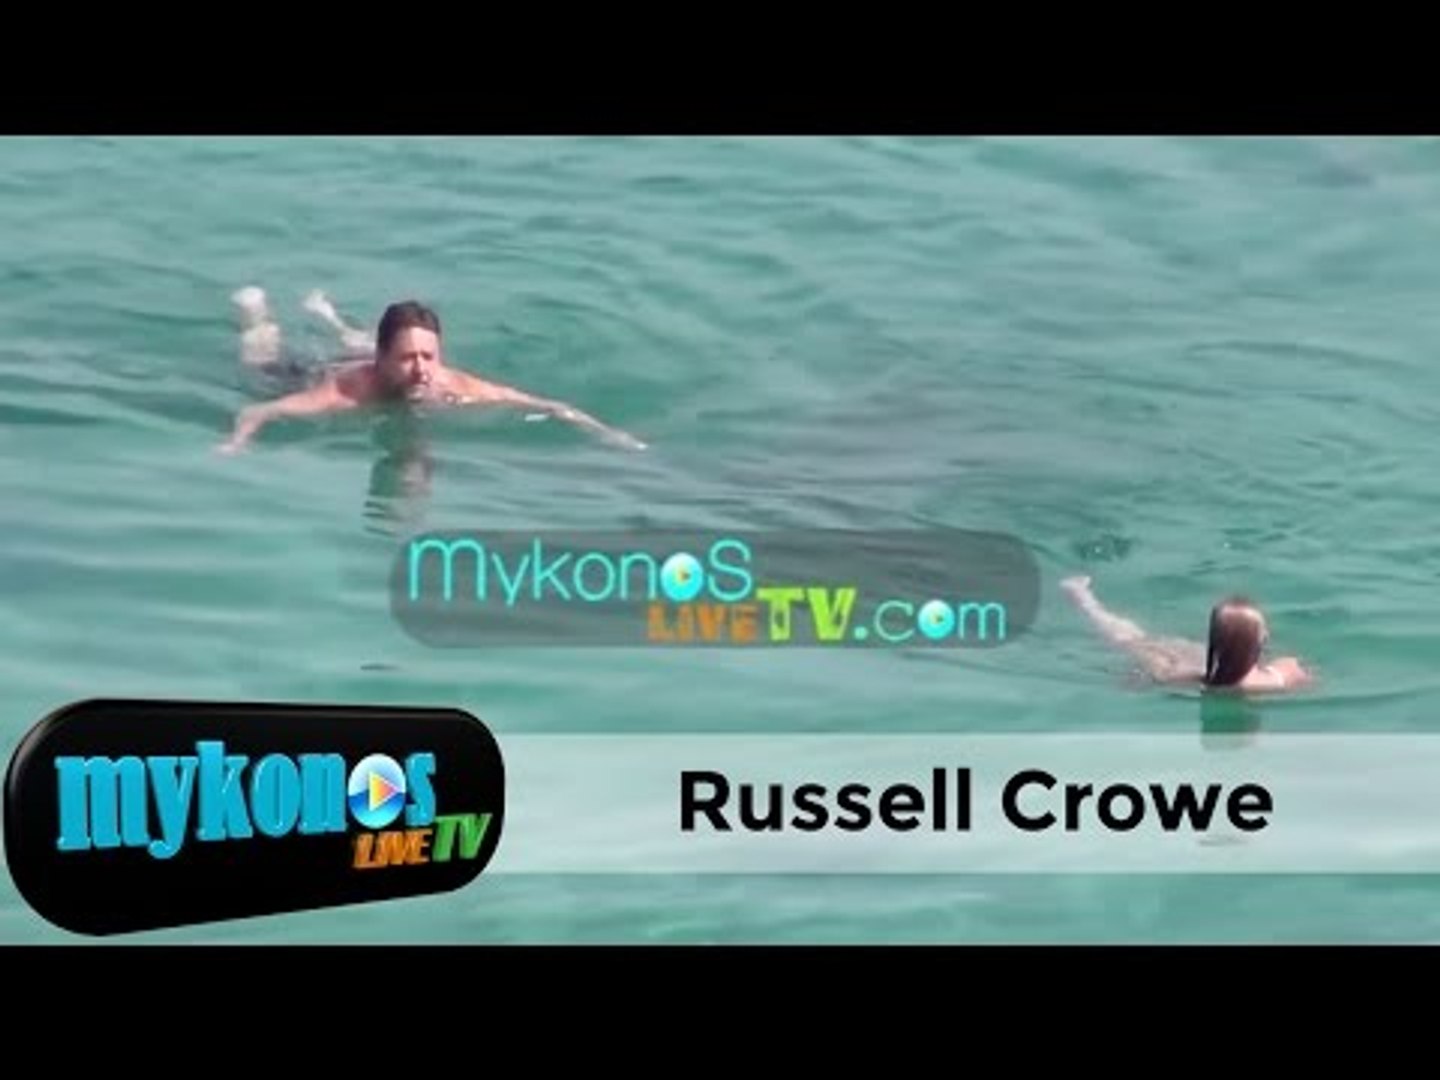 Russell Crowe and with friends swimming together in Mykonos